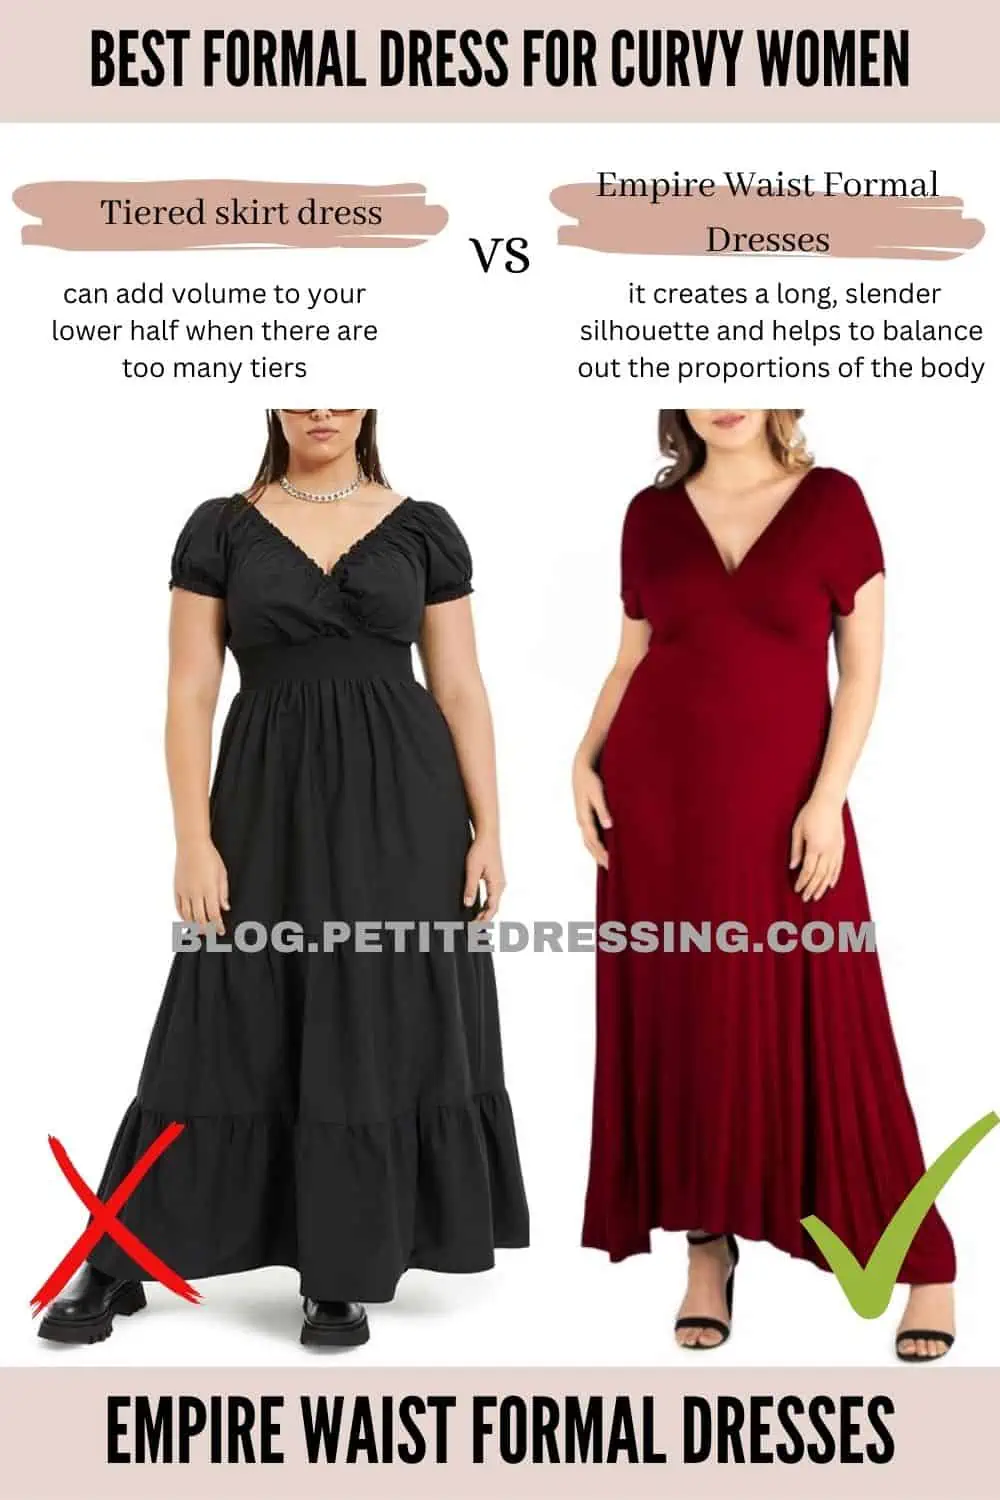 5 Flattering Dresses for Plus-Size Women to Enhance Their Silhouette -  Attire Club by Fraquoh and Franchomme